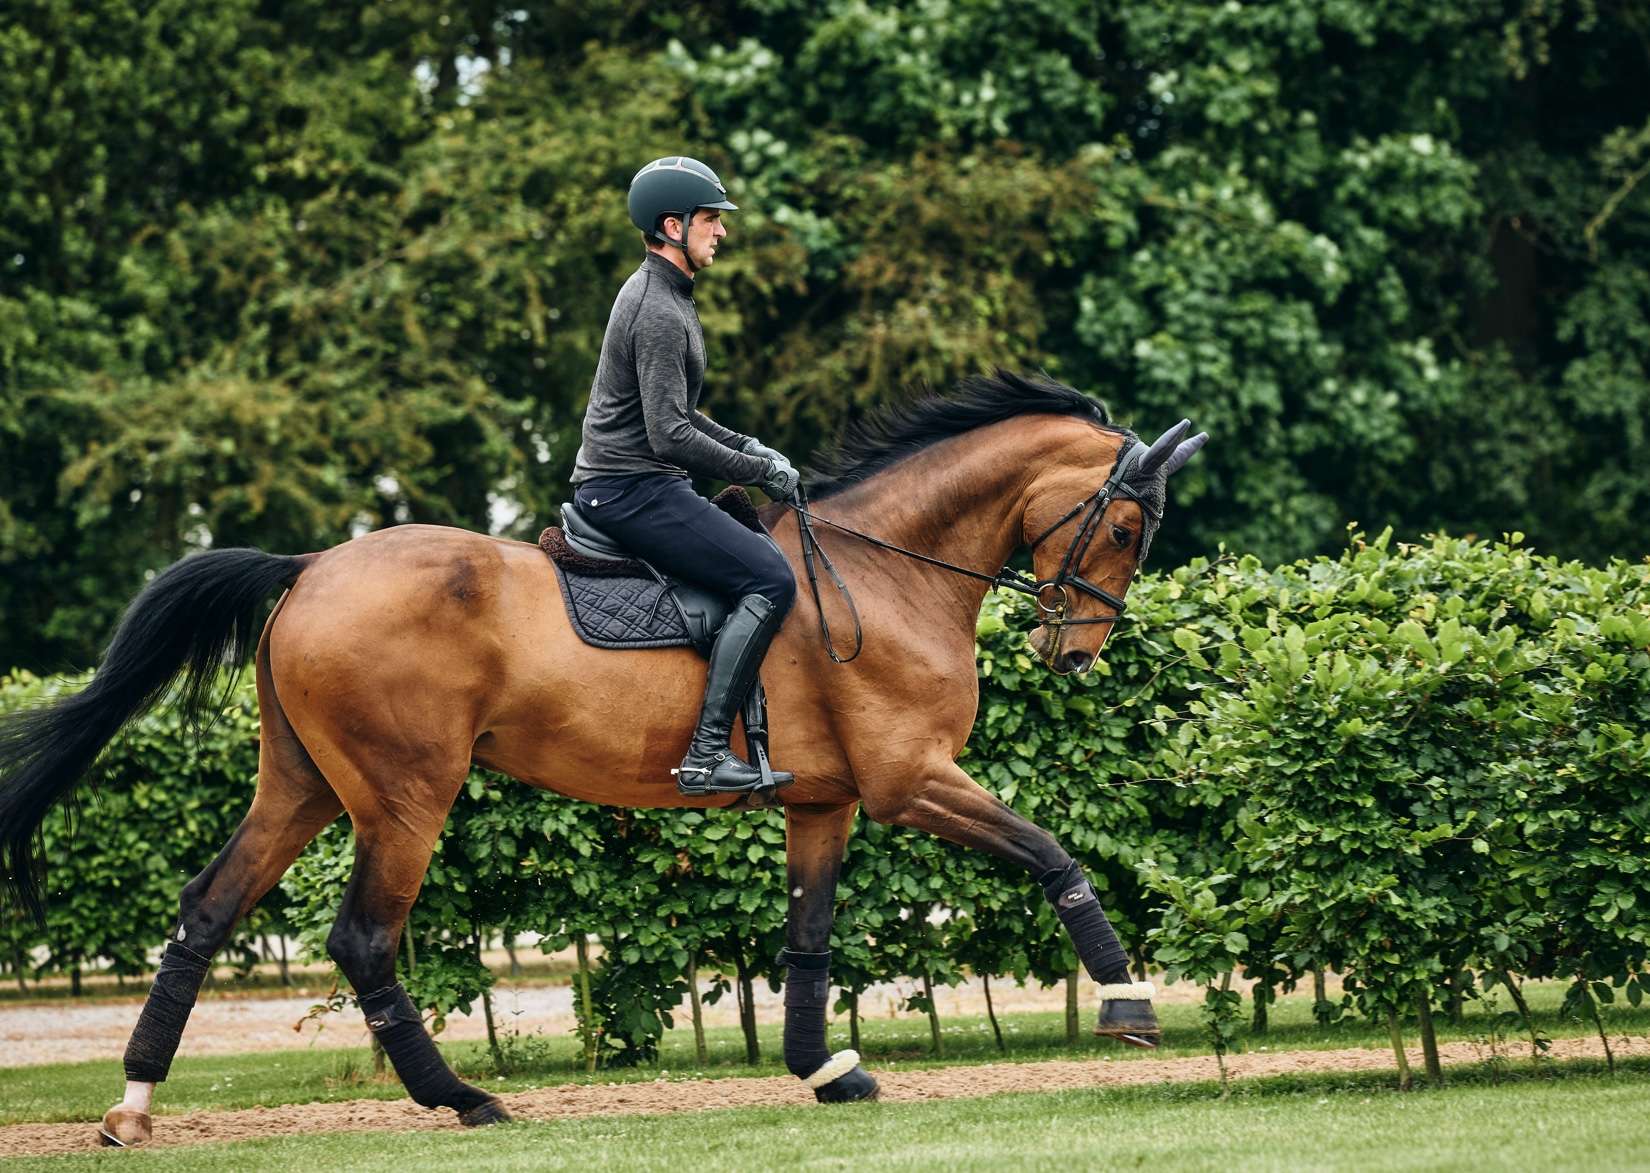 learn how to help support your horse's joints with this article from the golden paste company. Image of a horse and rider cantering